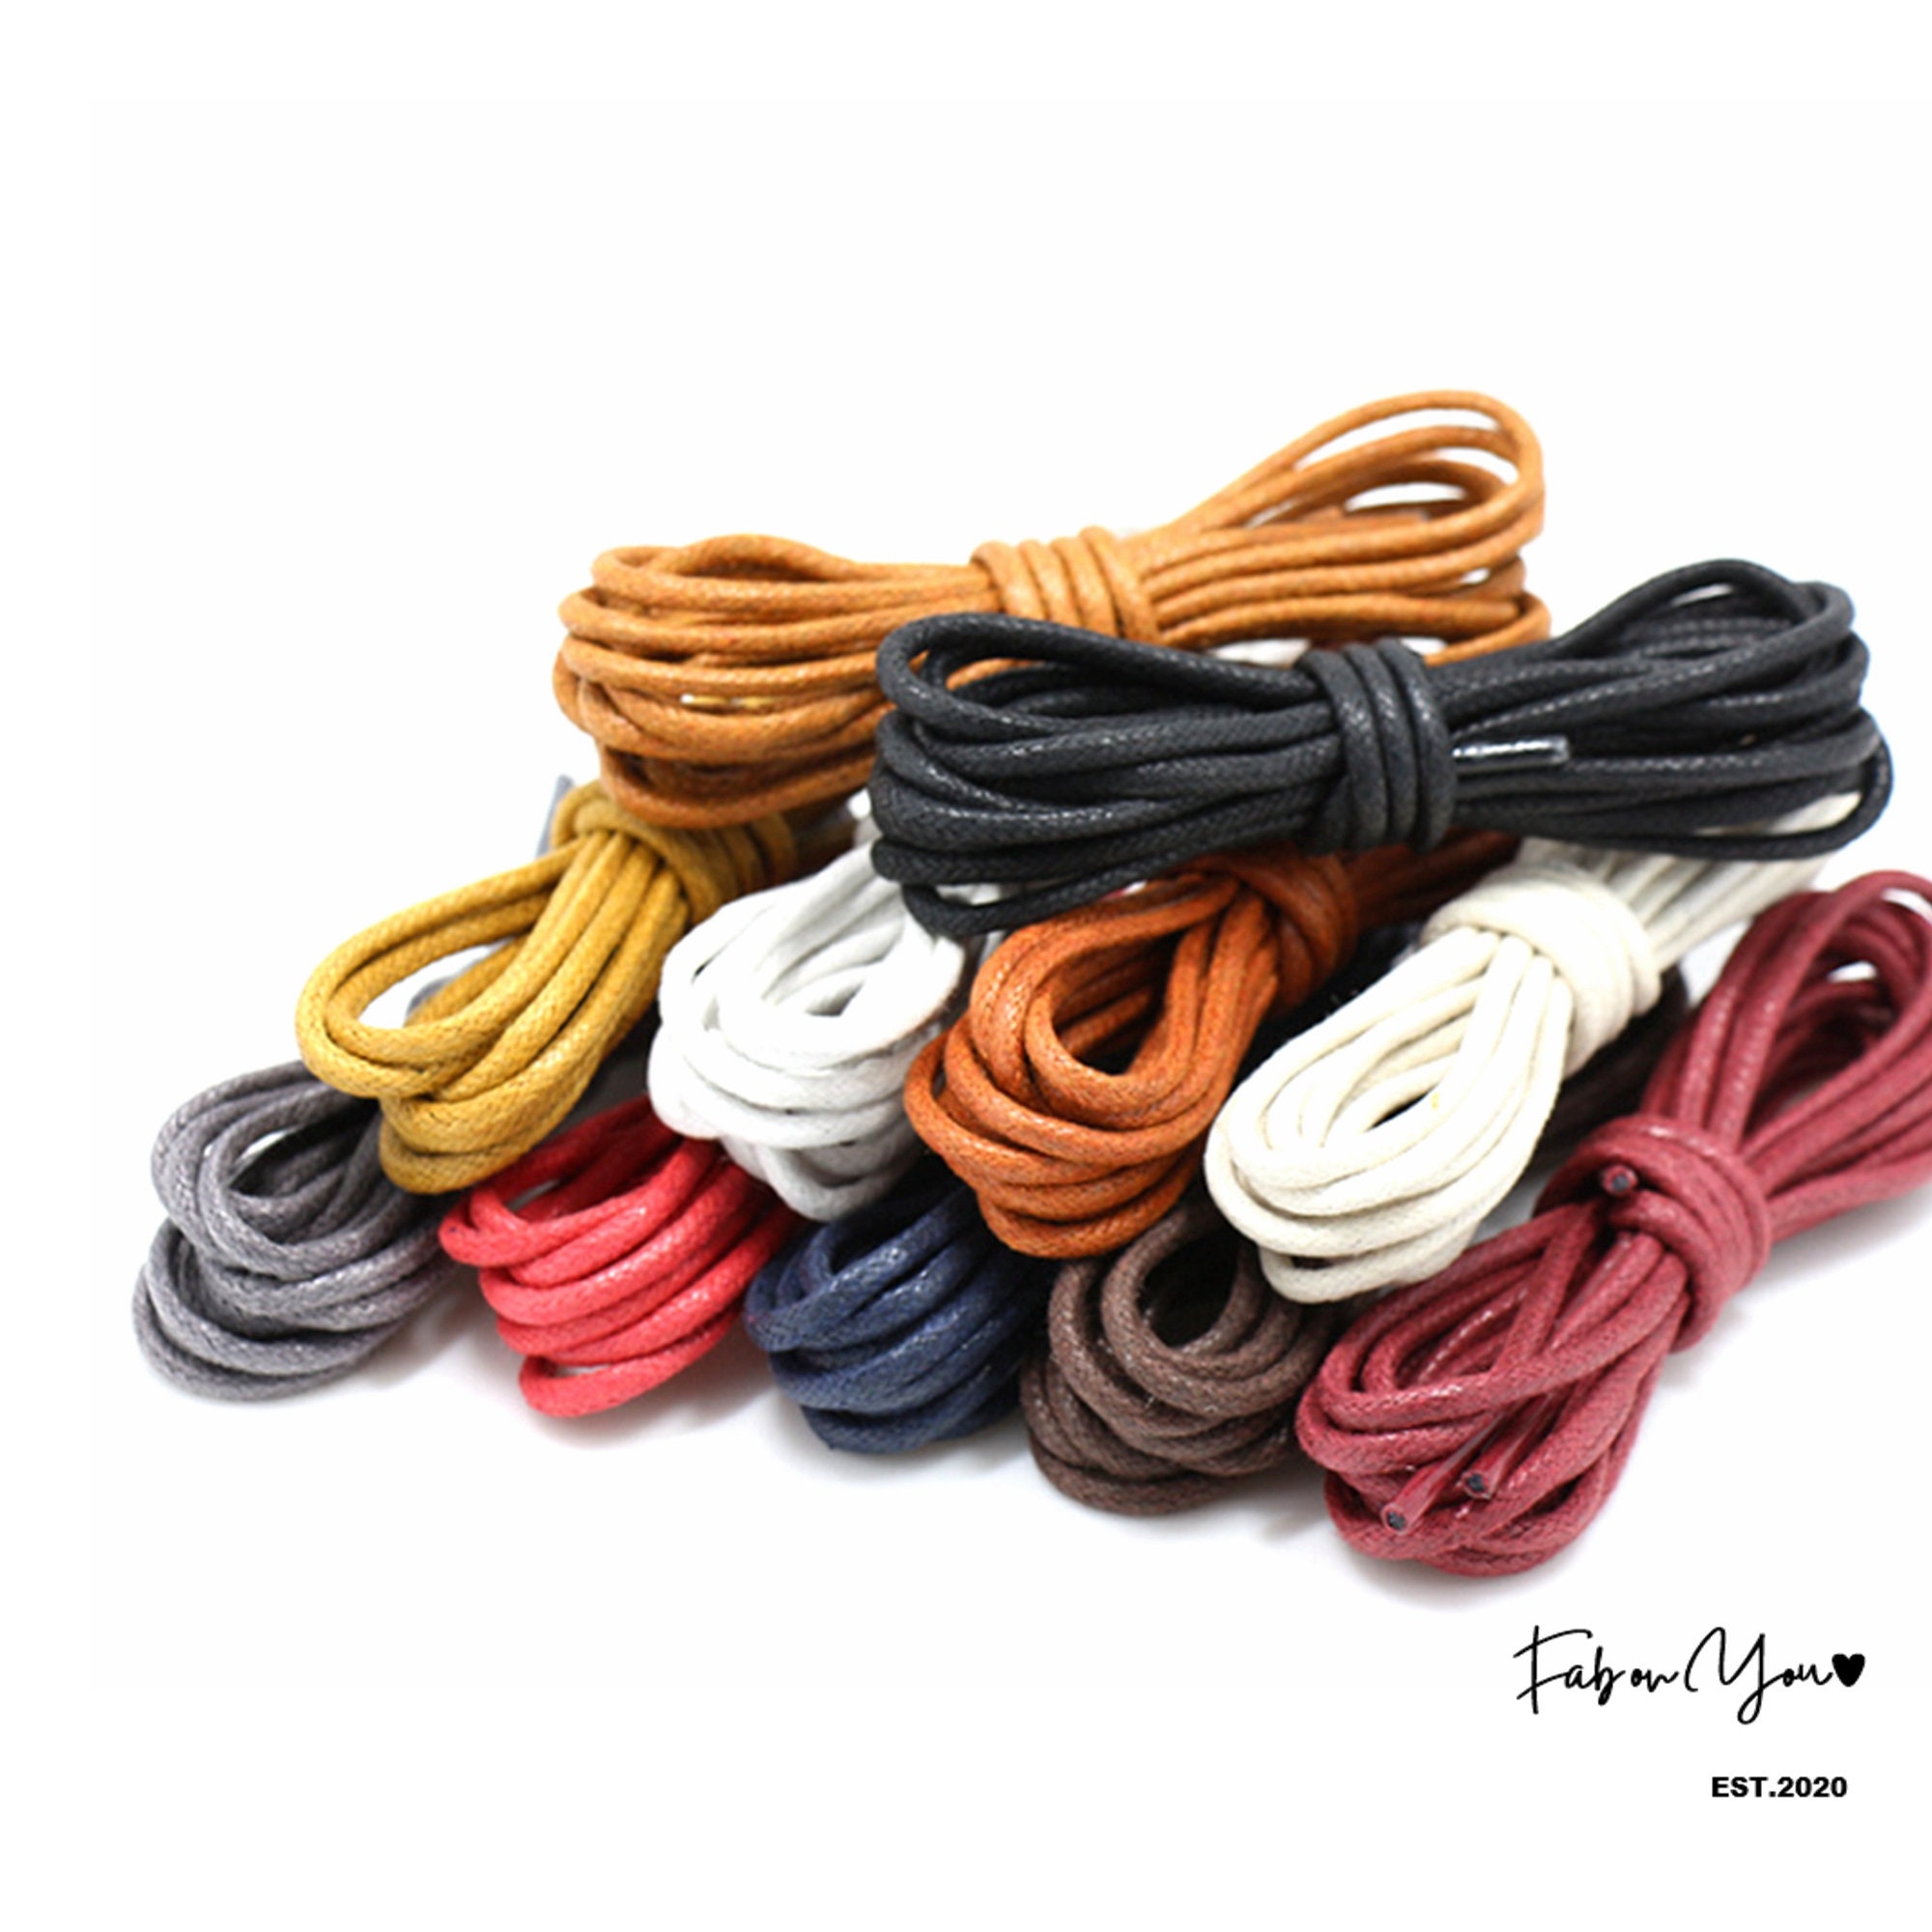 Luxury Dark Grey Leather Shoelaces With Gold Metal Tips by Loop King Laces  